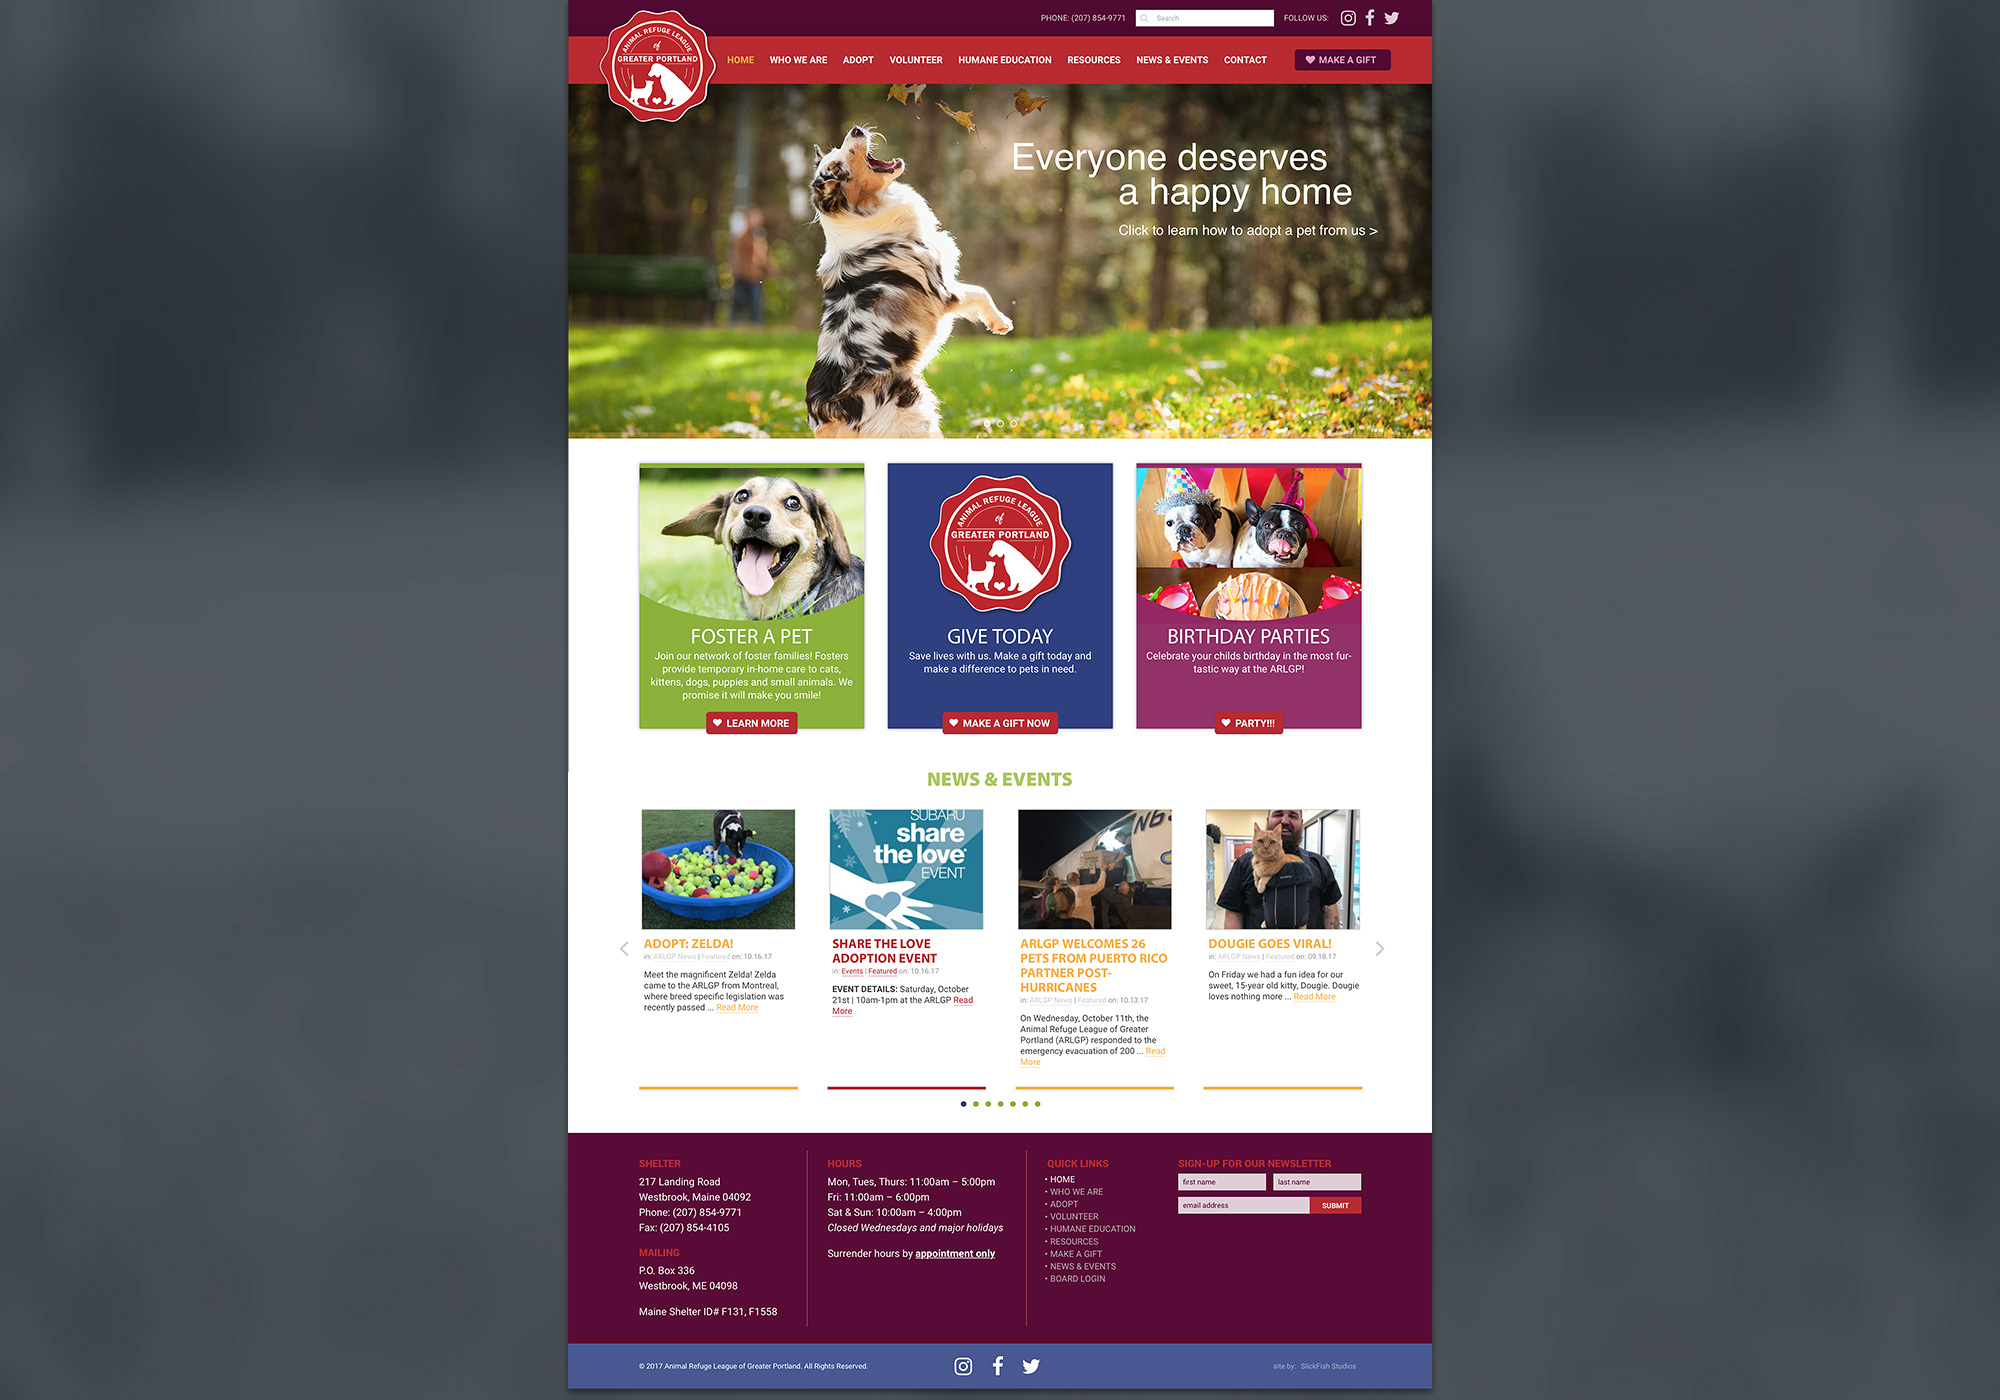 A screenshot of the SlickFish Studios designed and developed website for Animal Refuge League of Greater Portland in Maine